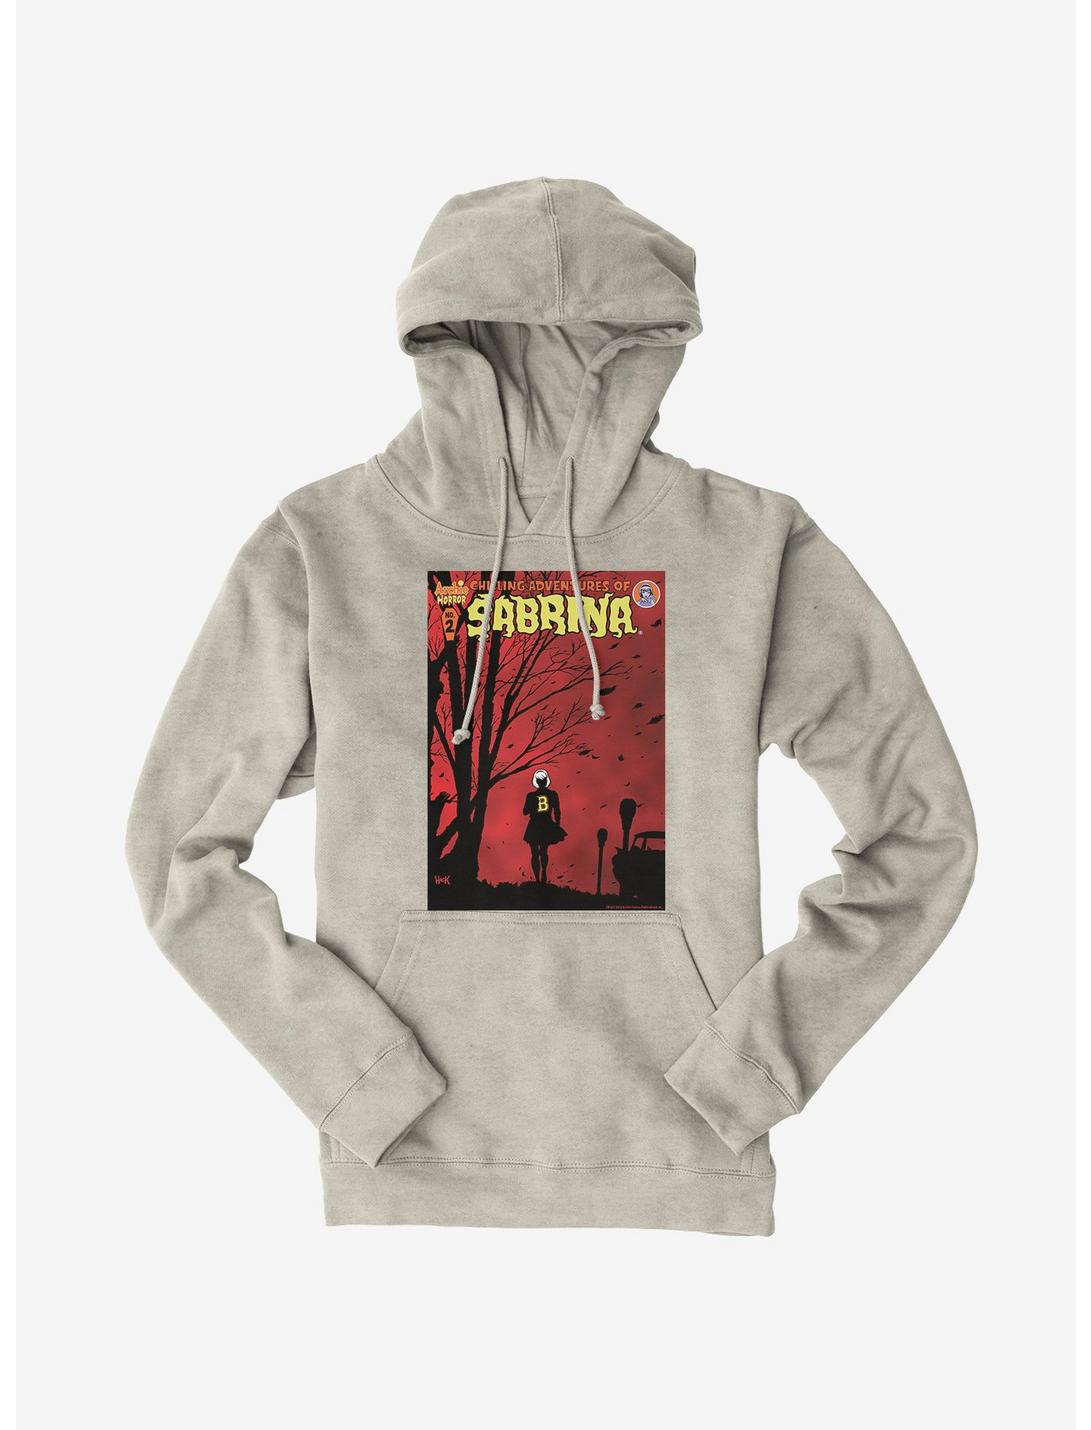 Archie Comics Chilling Adventures of Sabrina Windy Poster Hoodie, OATMEAL HEATHER, hi-res